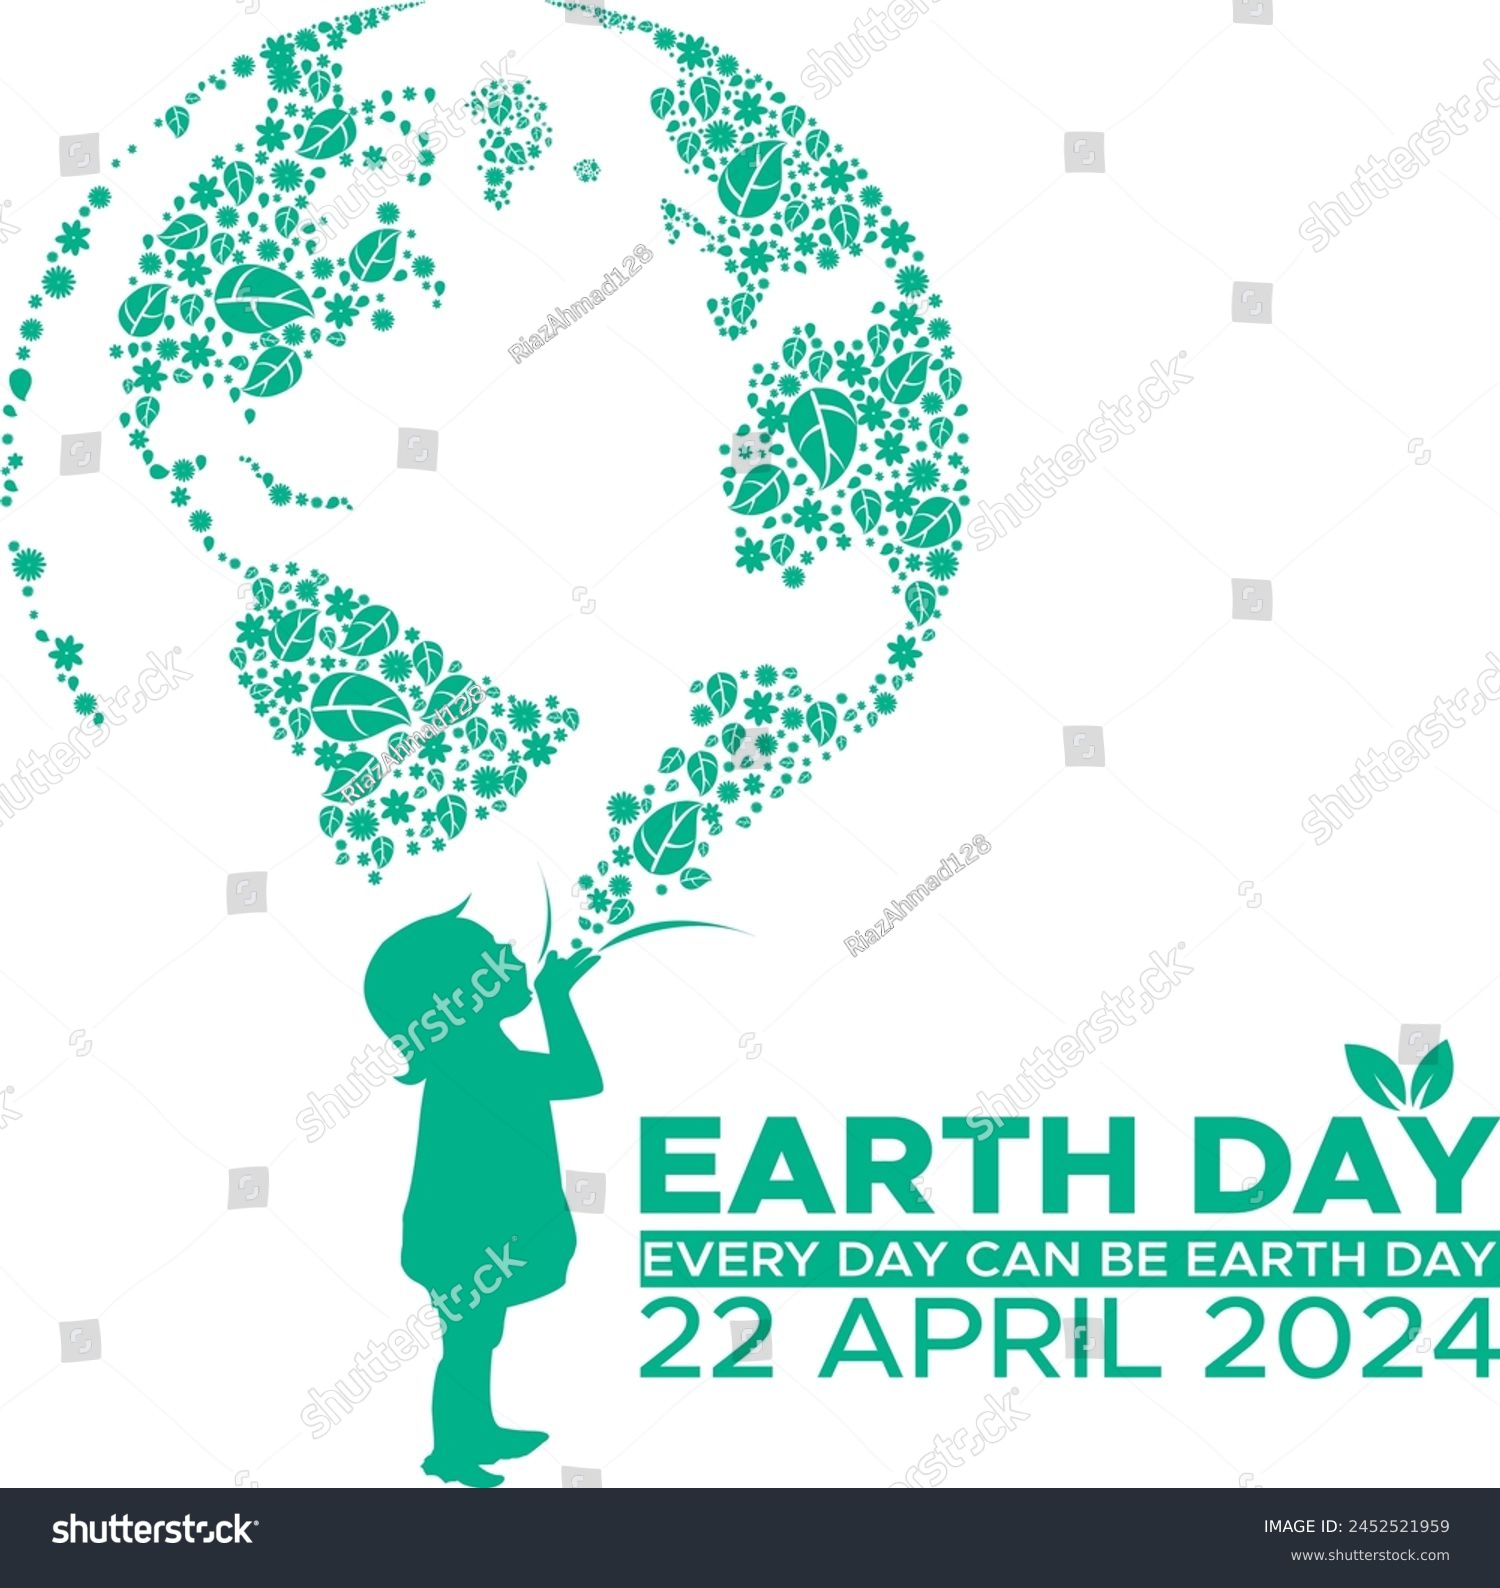 SVG of Earth Day. International Mother Earth Day. Environmental problems and environmental protection. Vector illustration. Earth day 2024, 22 april 2024 earth day svg